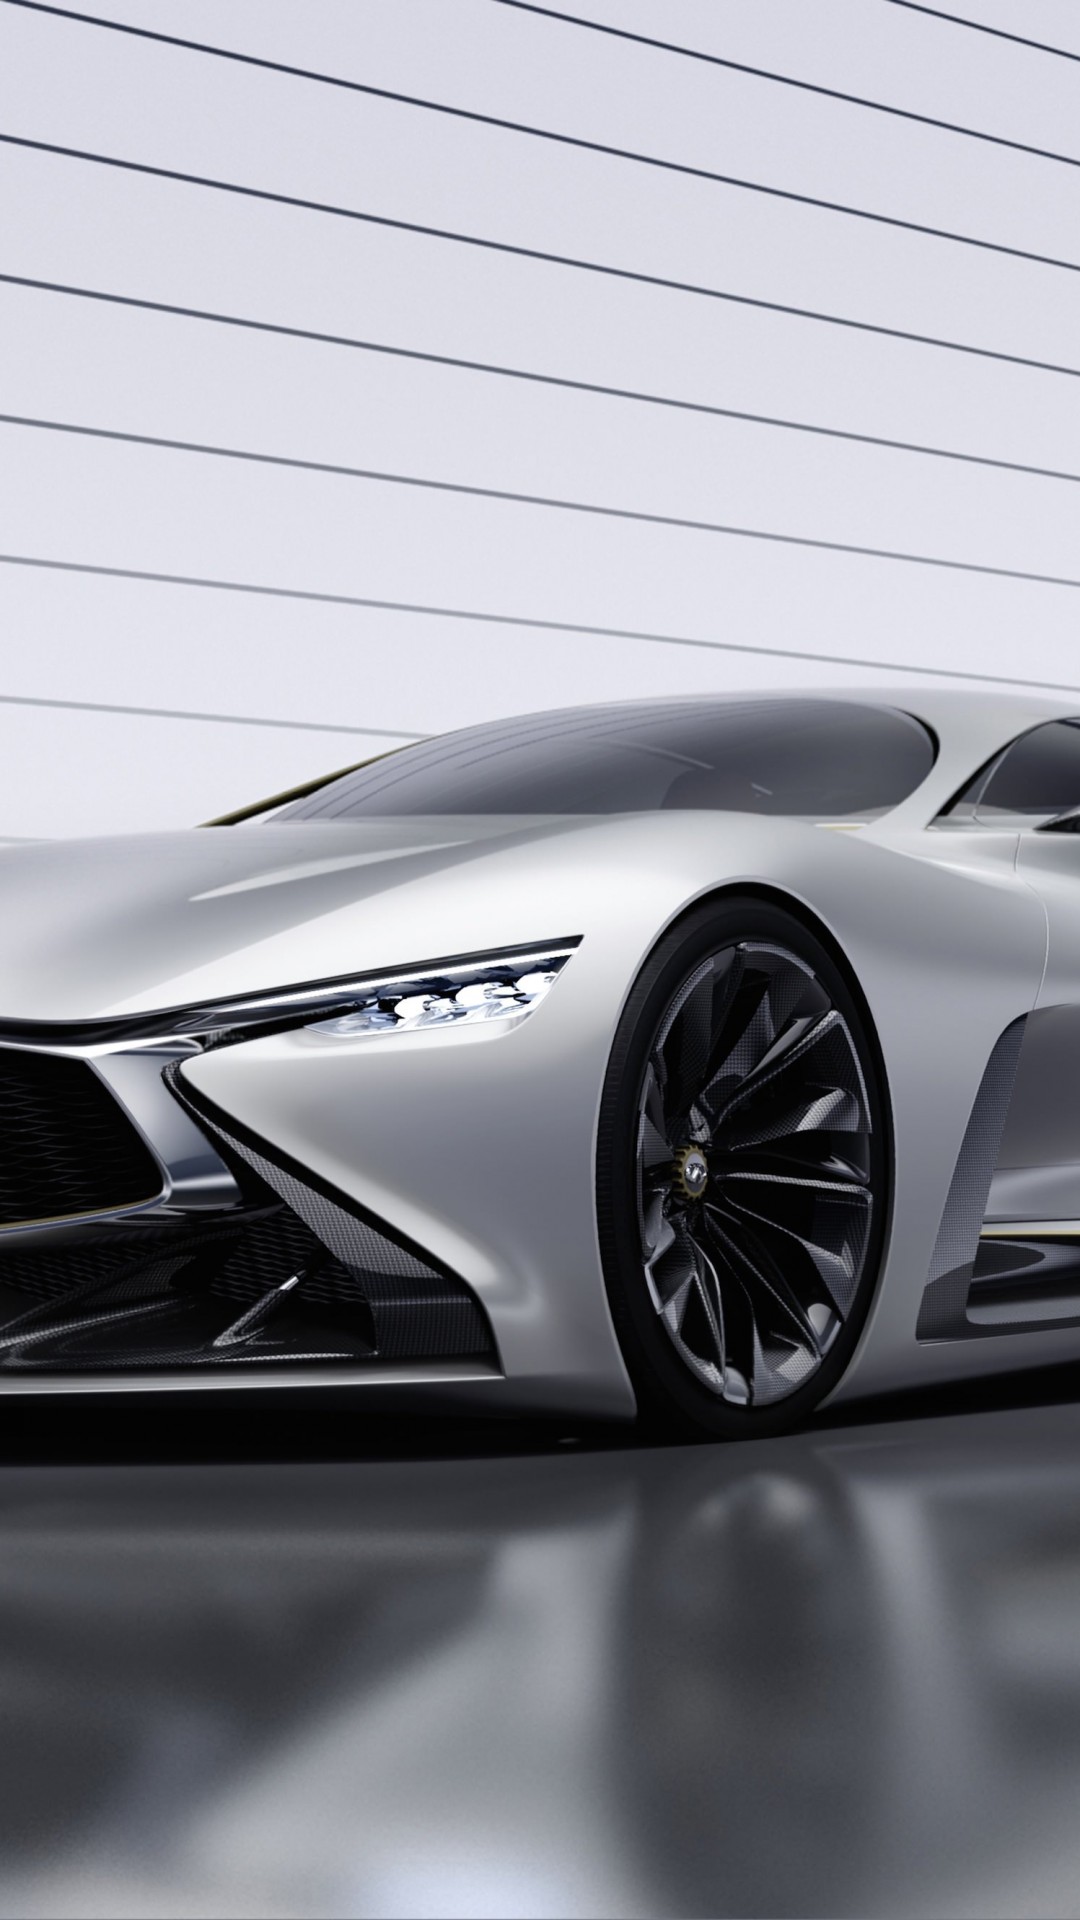 Infiniti Vision GT Concept Wallpaper for SONY Xperia Z3